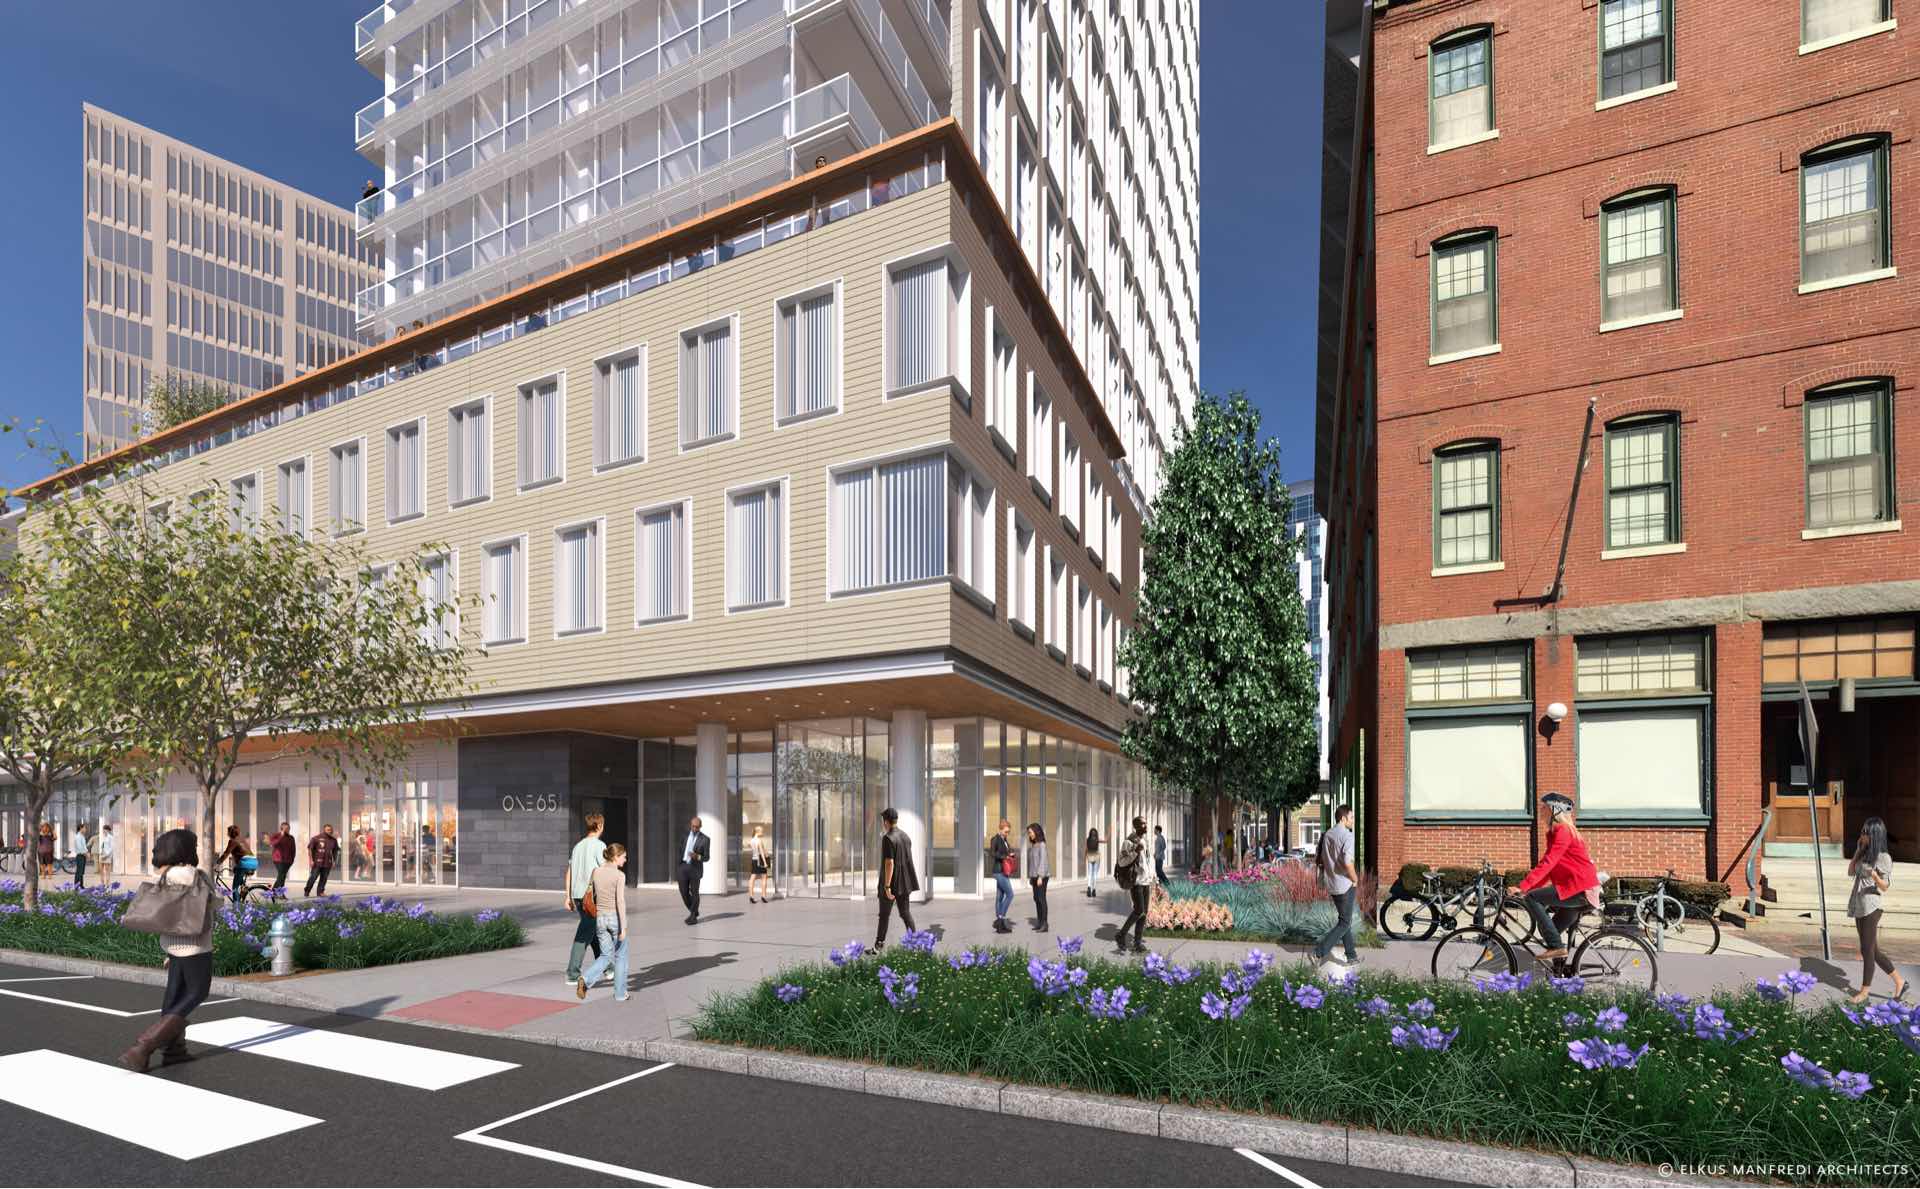 A new type of living experience, surrounded by the energy and excitement of Kendall Square.